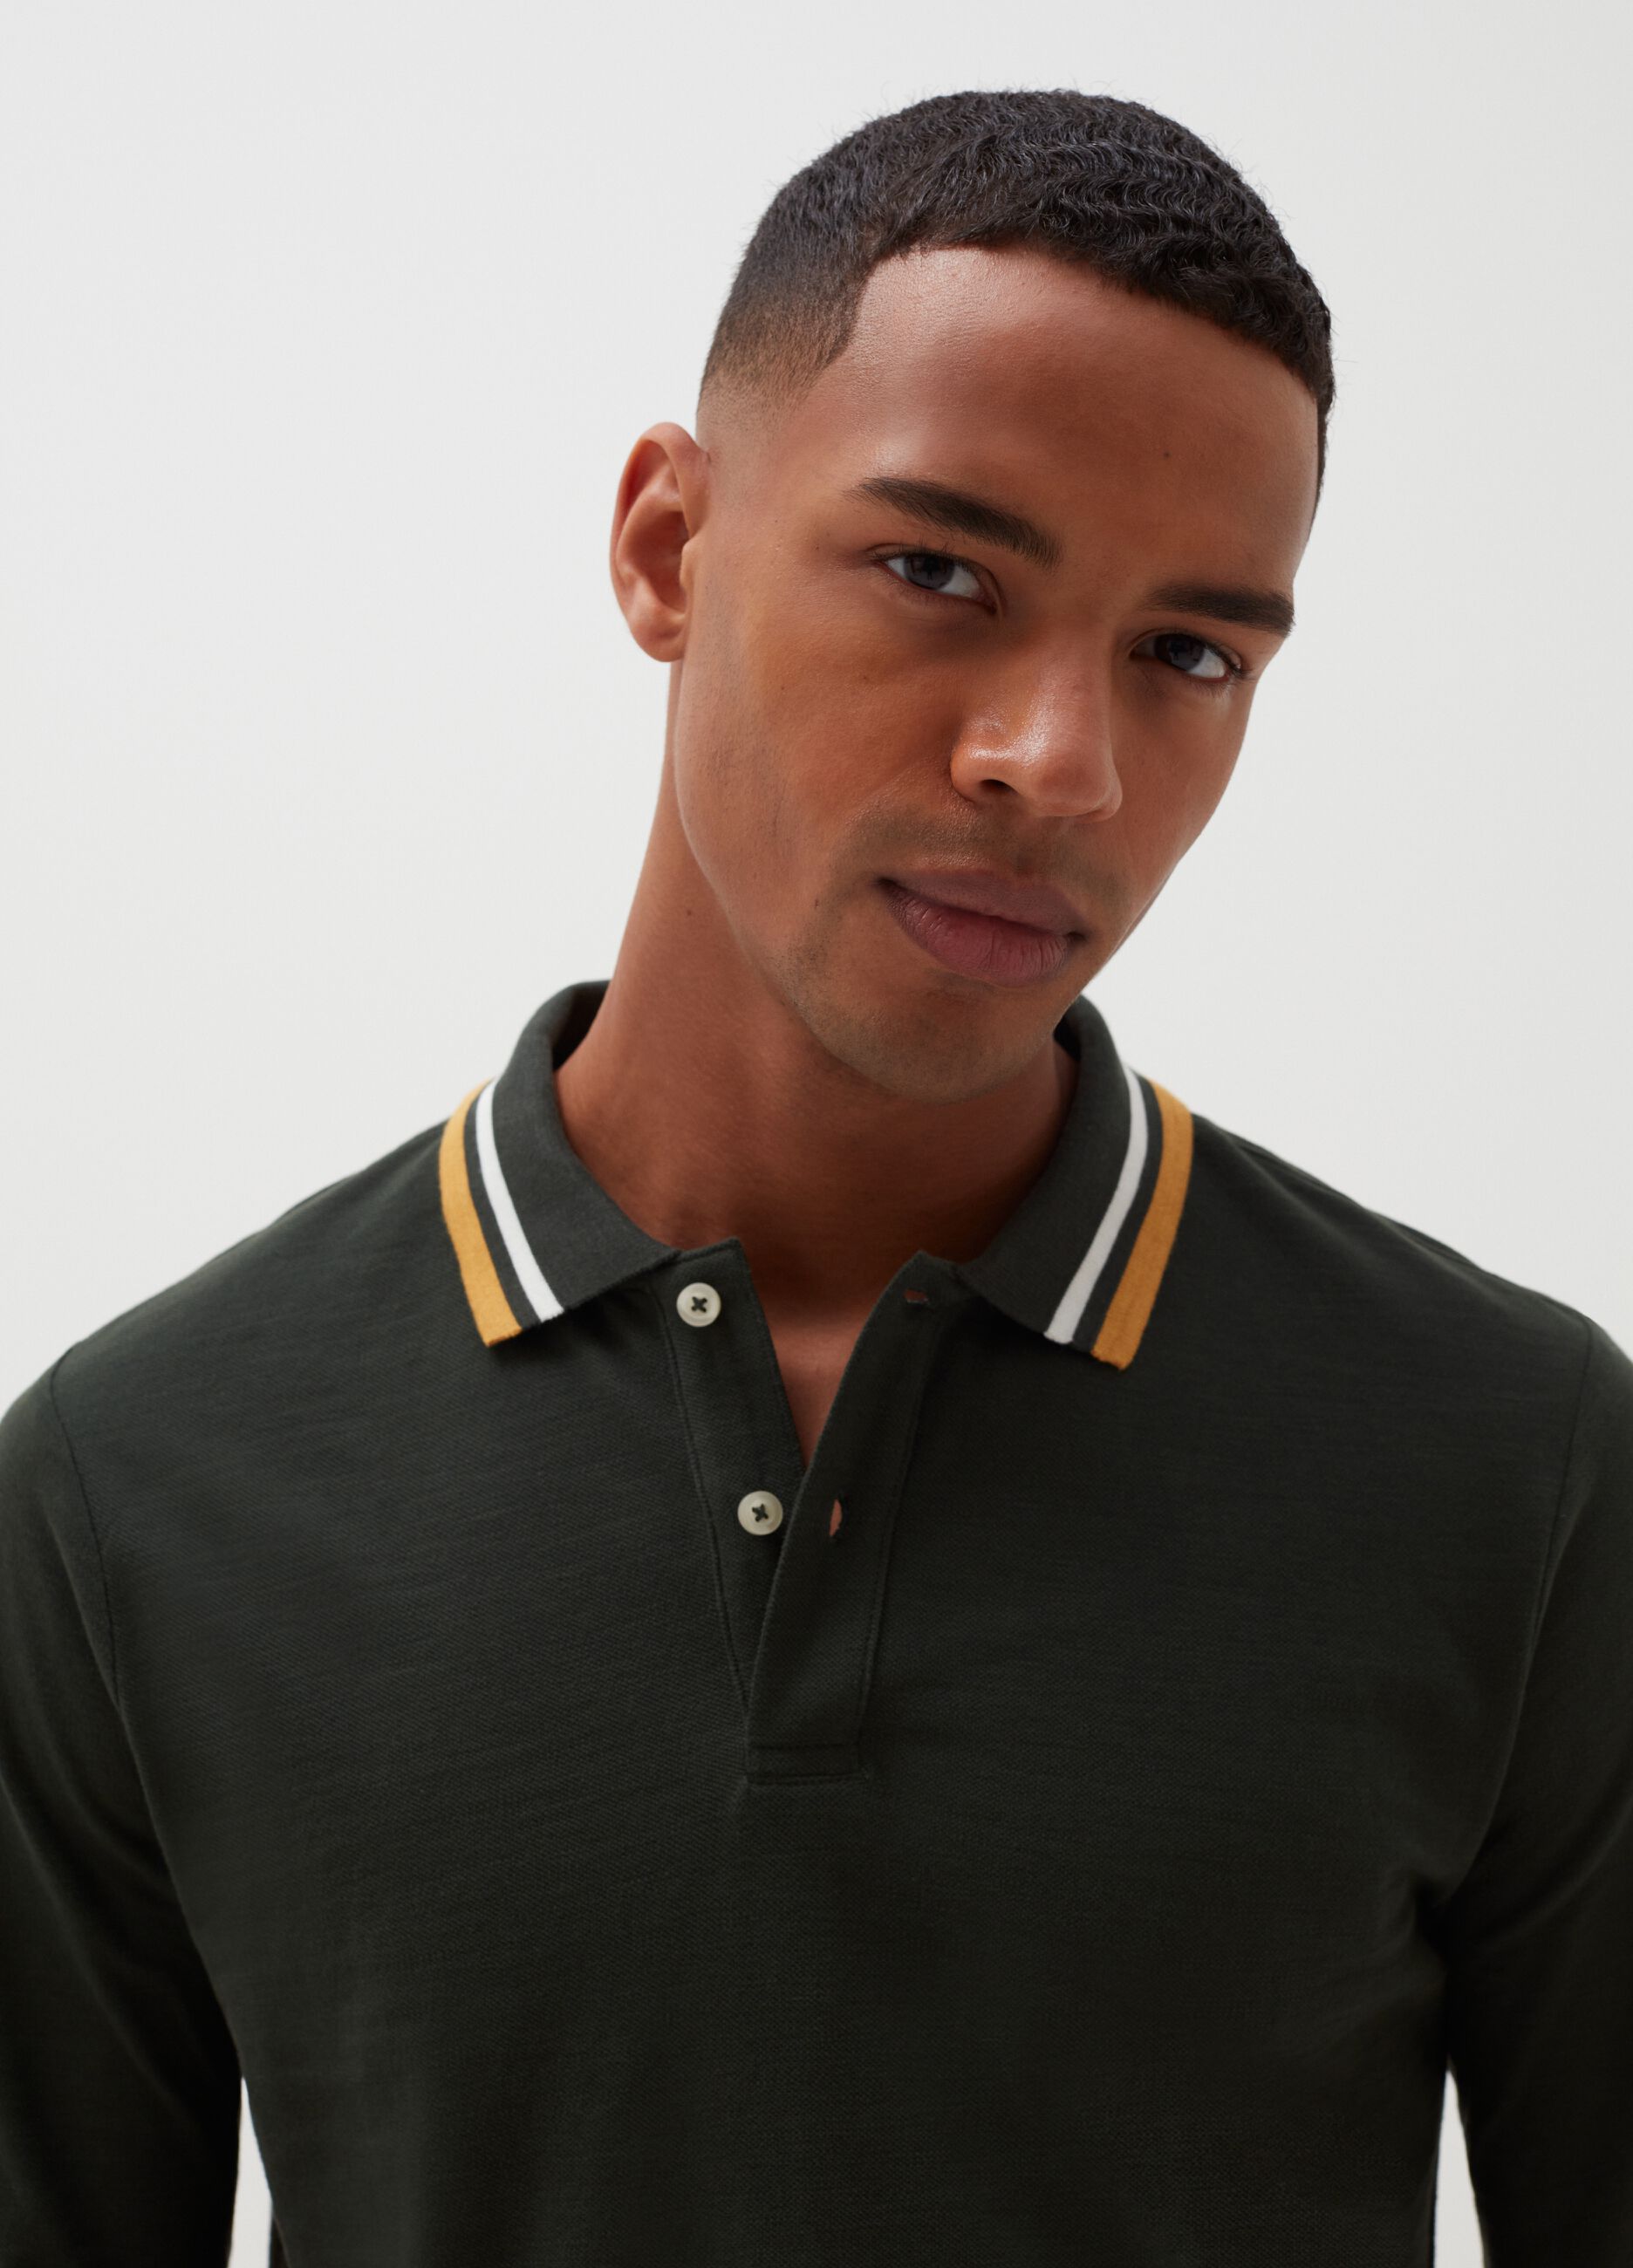 Jersey polo shirt with striped collar